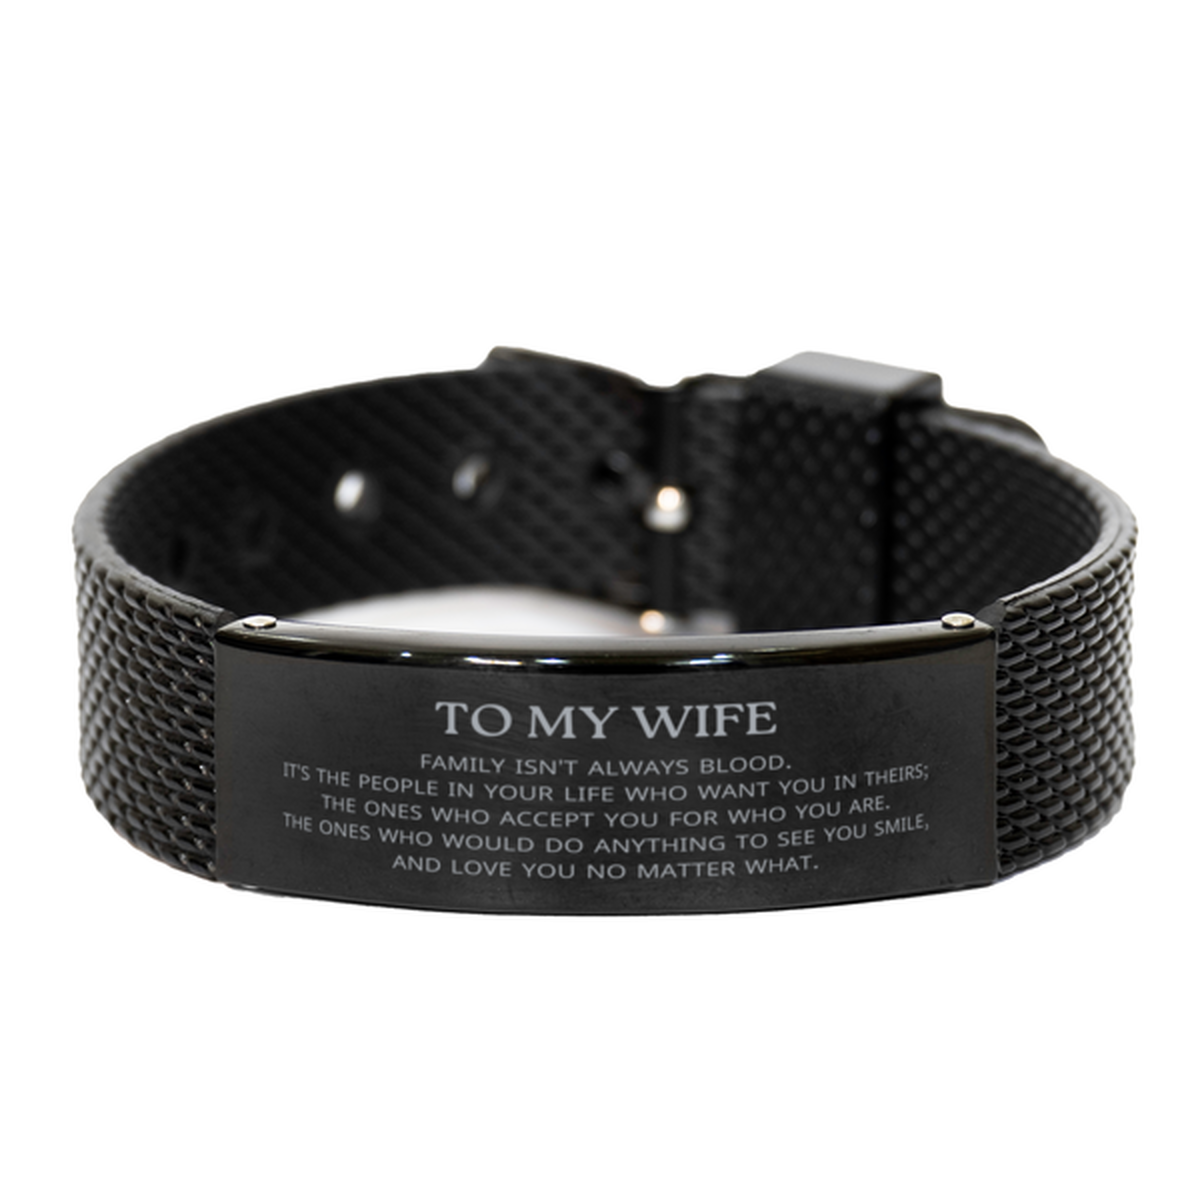 To My Wife Gifts, Family isn't always blood, Wife Black Shark Mesh Bracelet, Birthday Christmas Unique Present For Wife